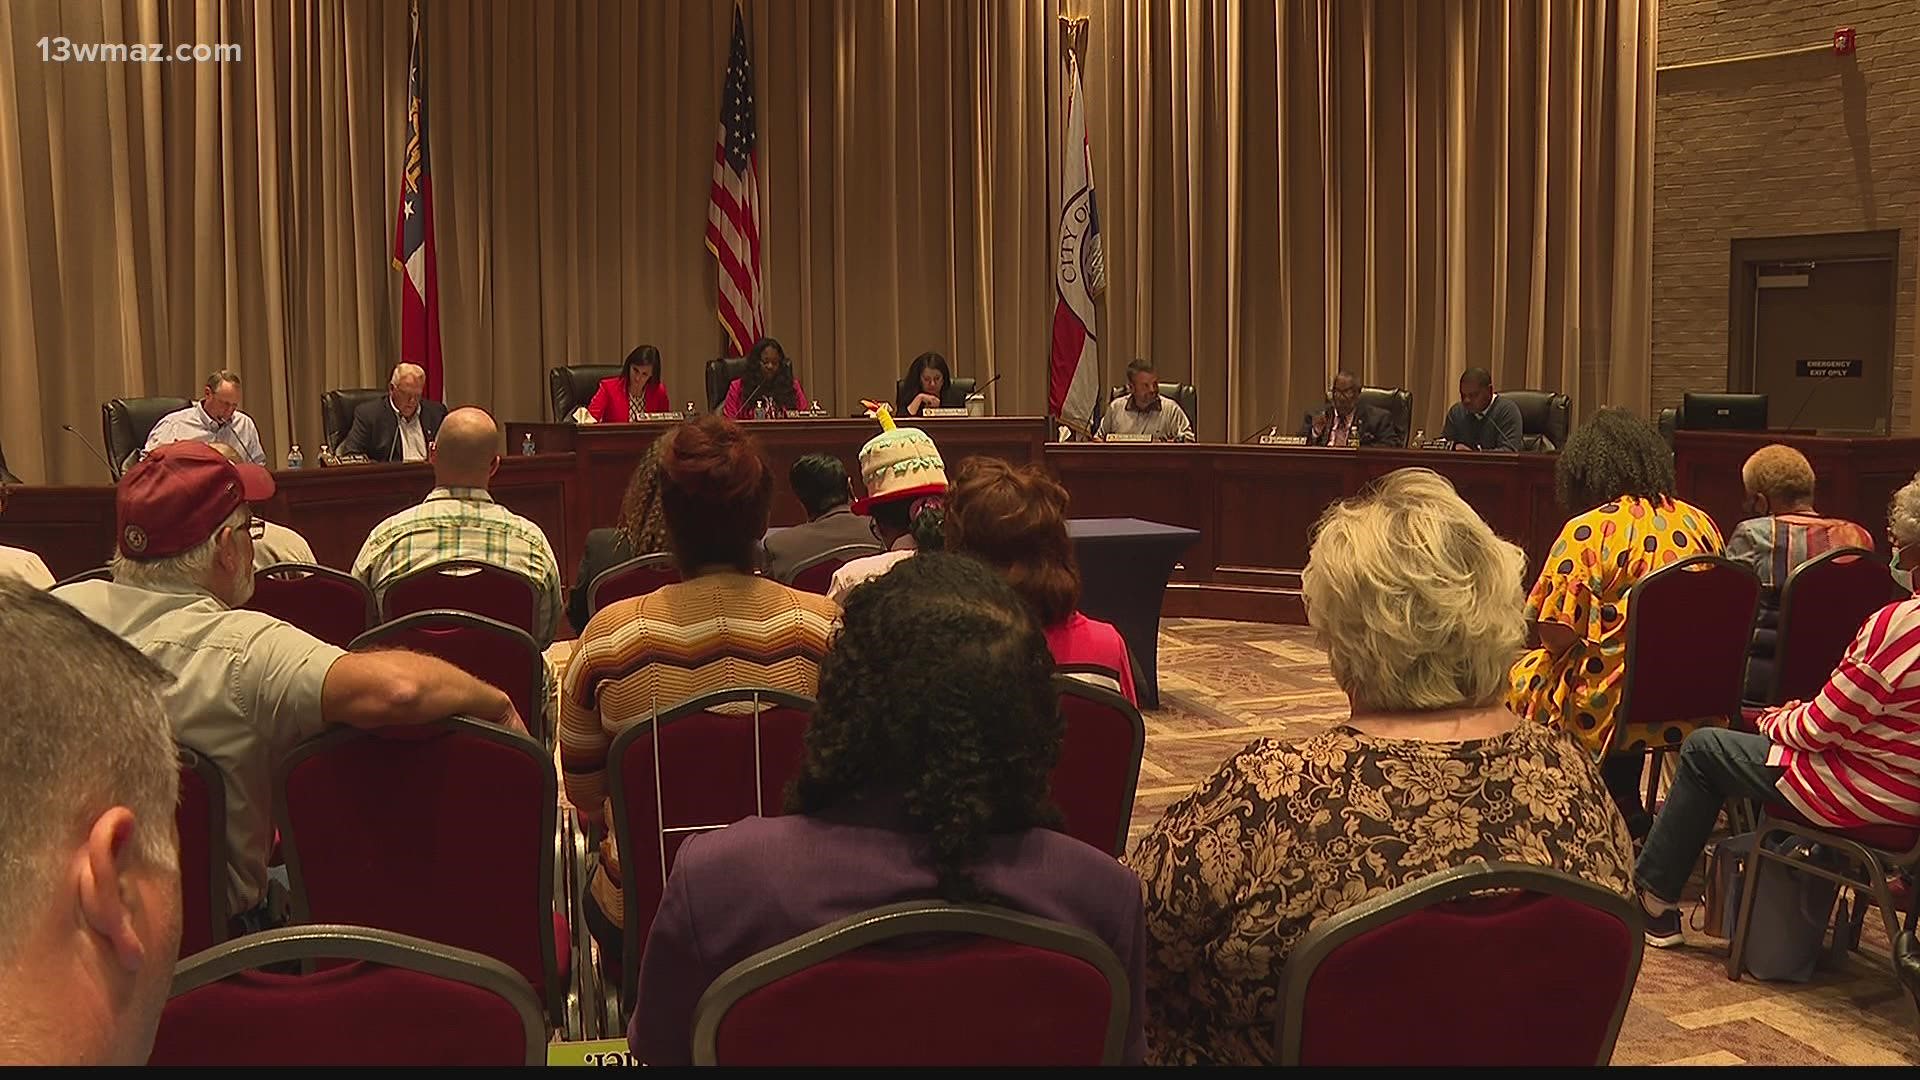 Warner Robins mayor and council took another step in bringing a downtown area to the city.